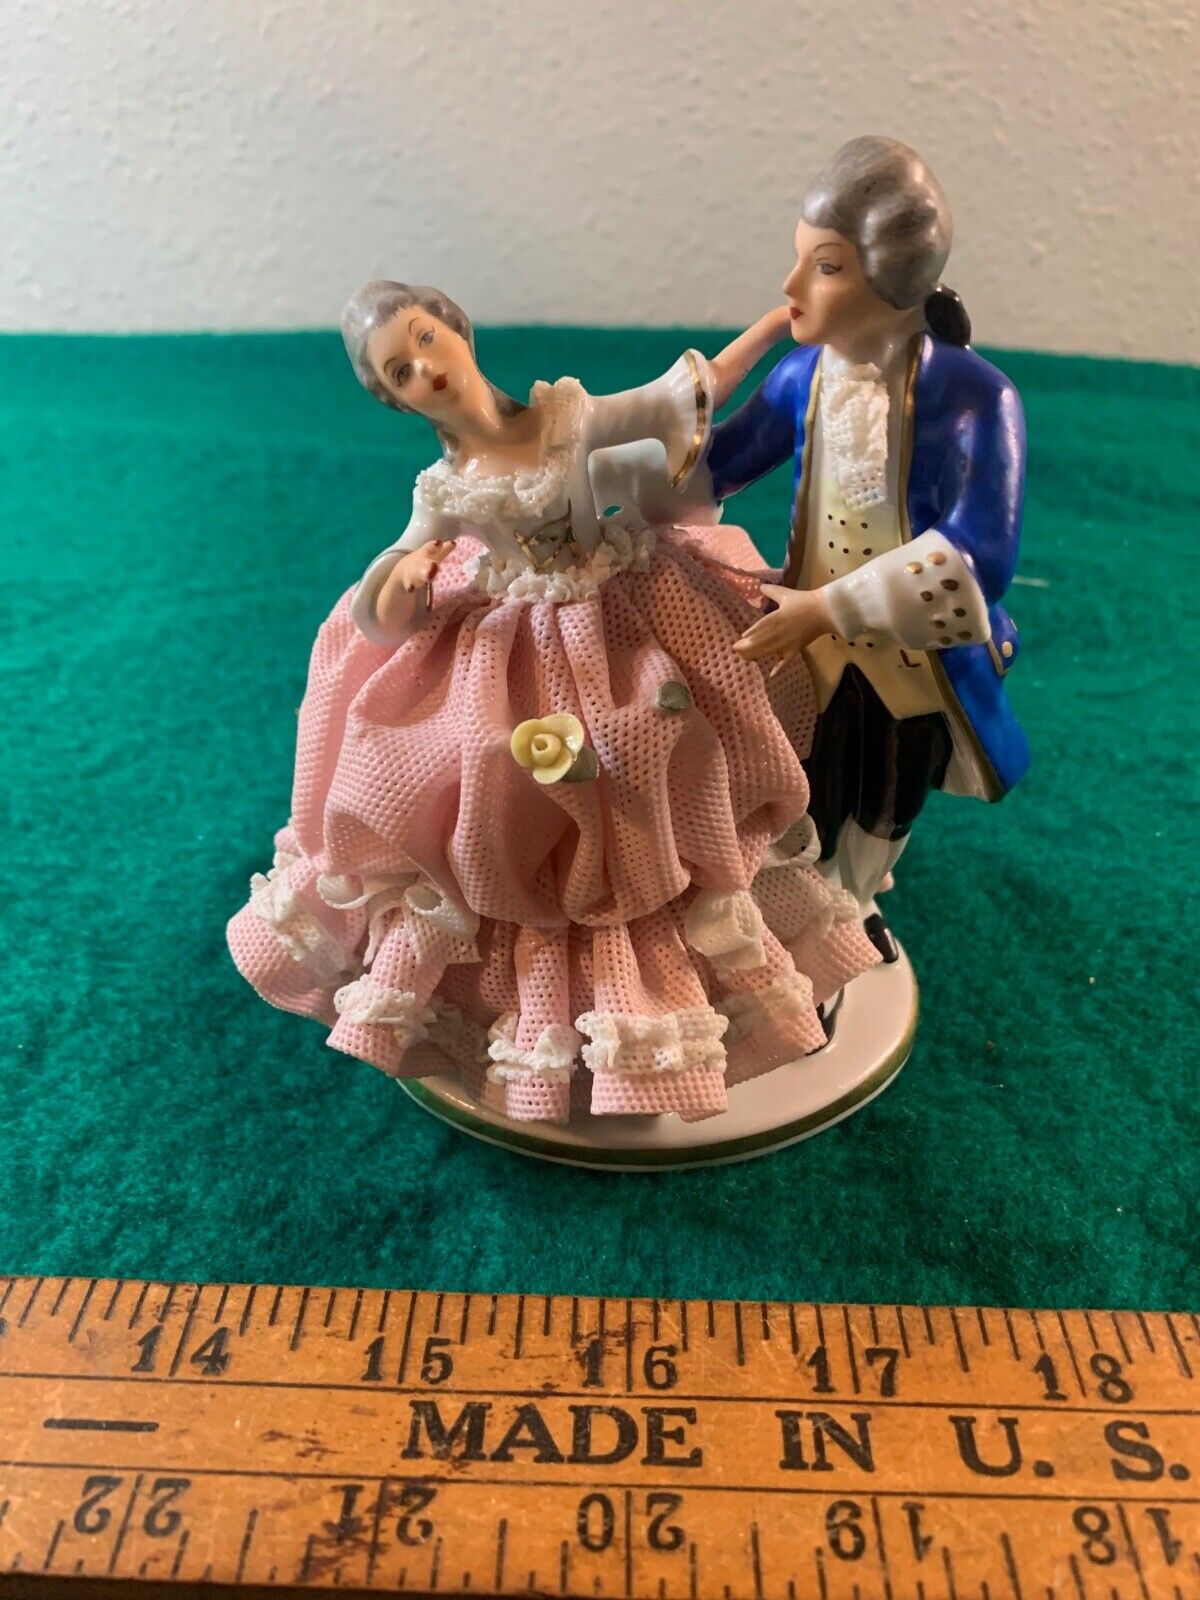 Vintage Dresden lace figurine with man